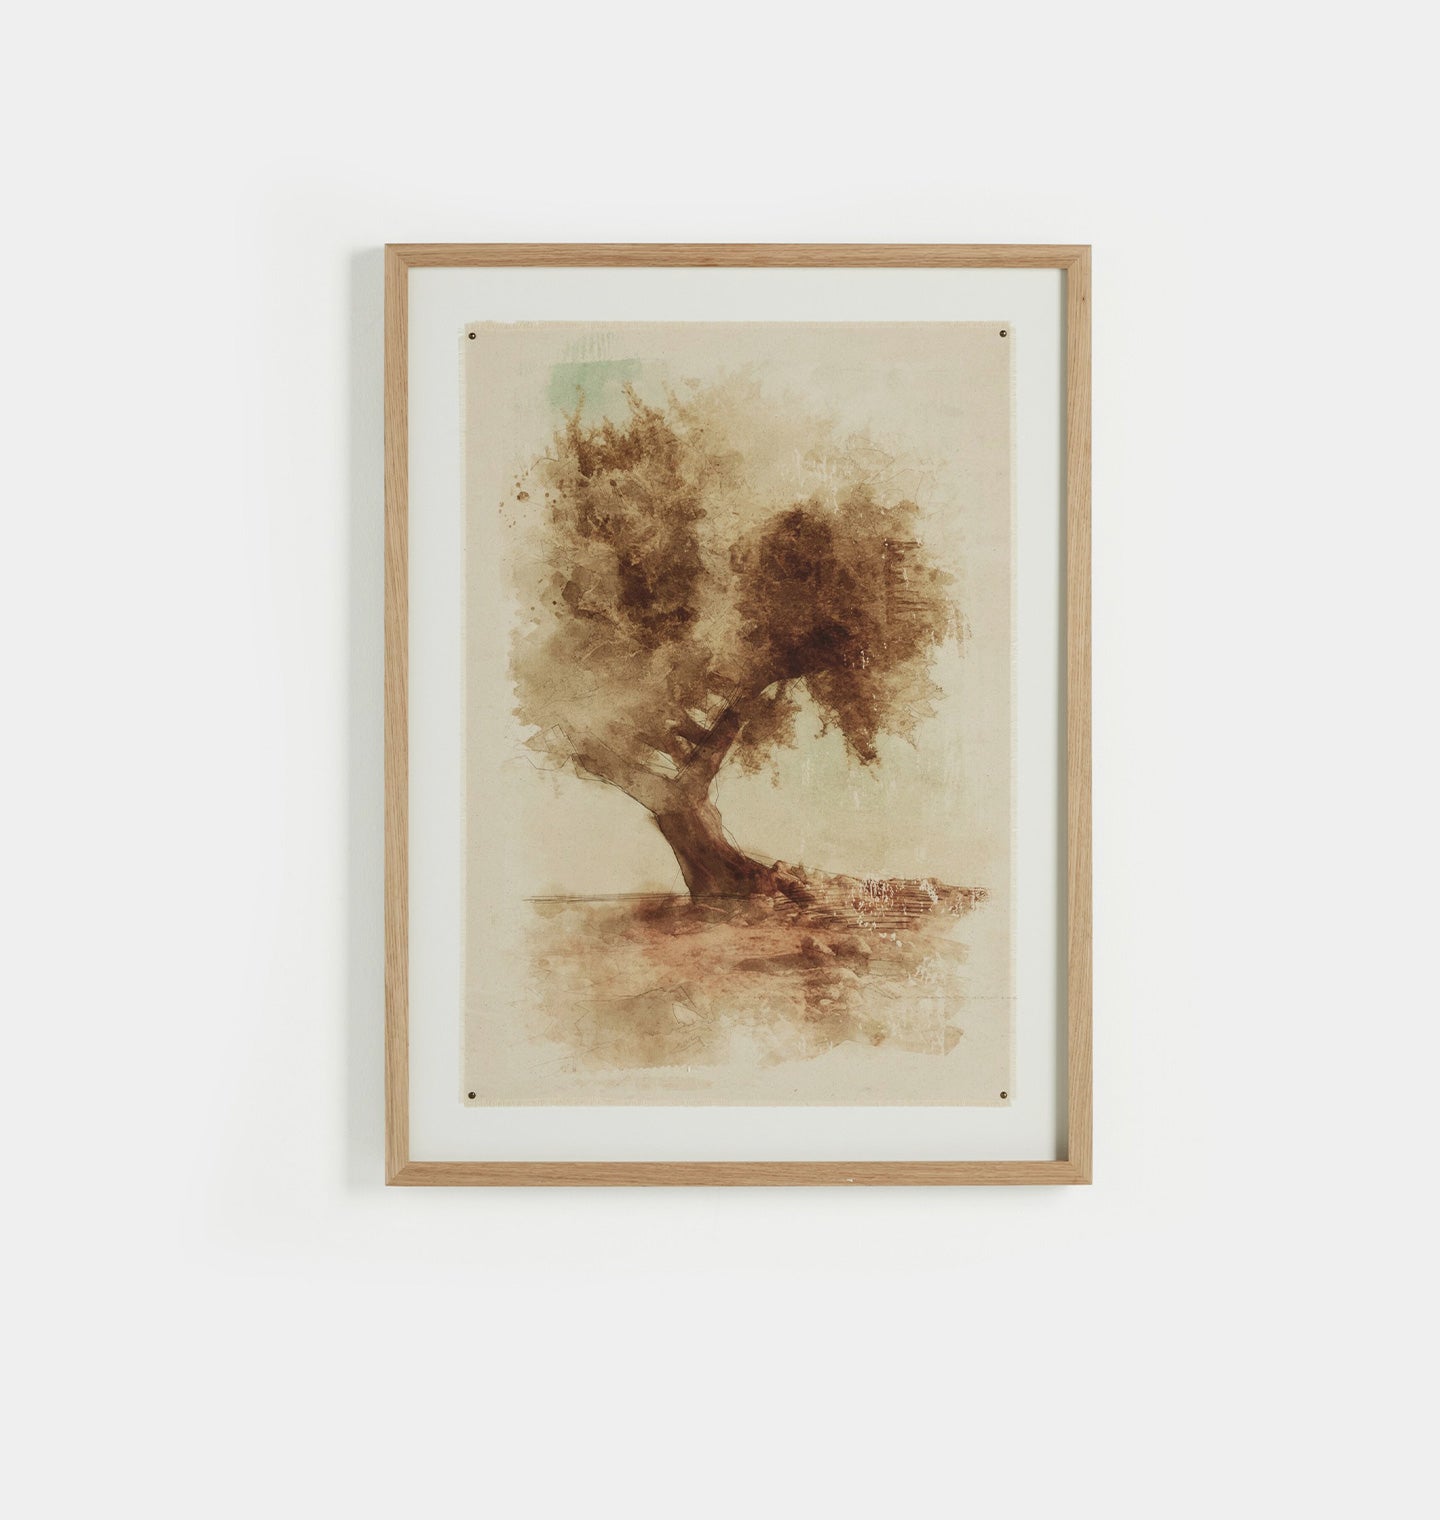 Undone Cypress by Coup d'Esprit Framed Print